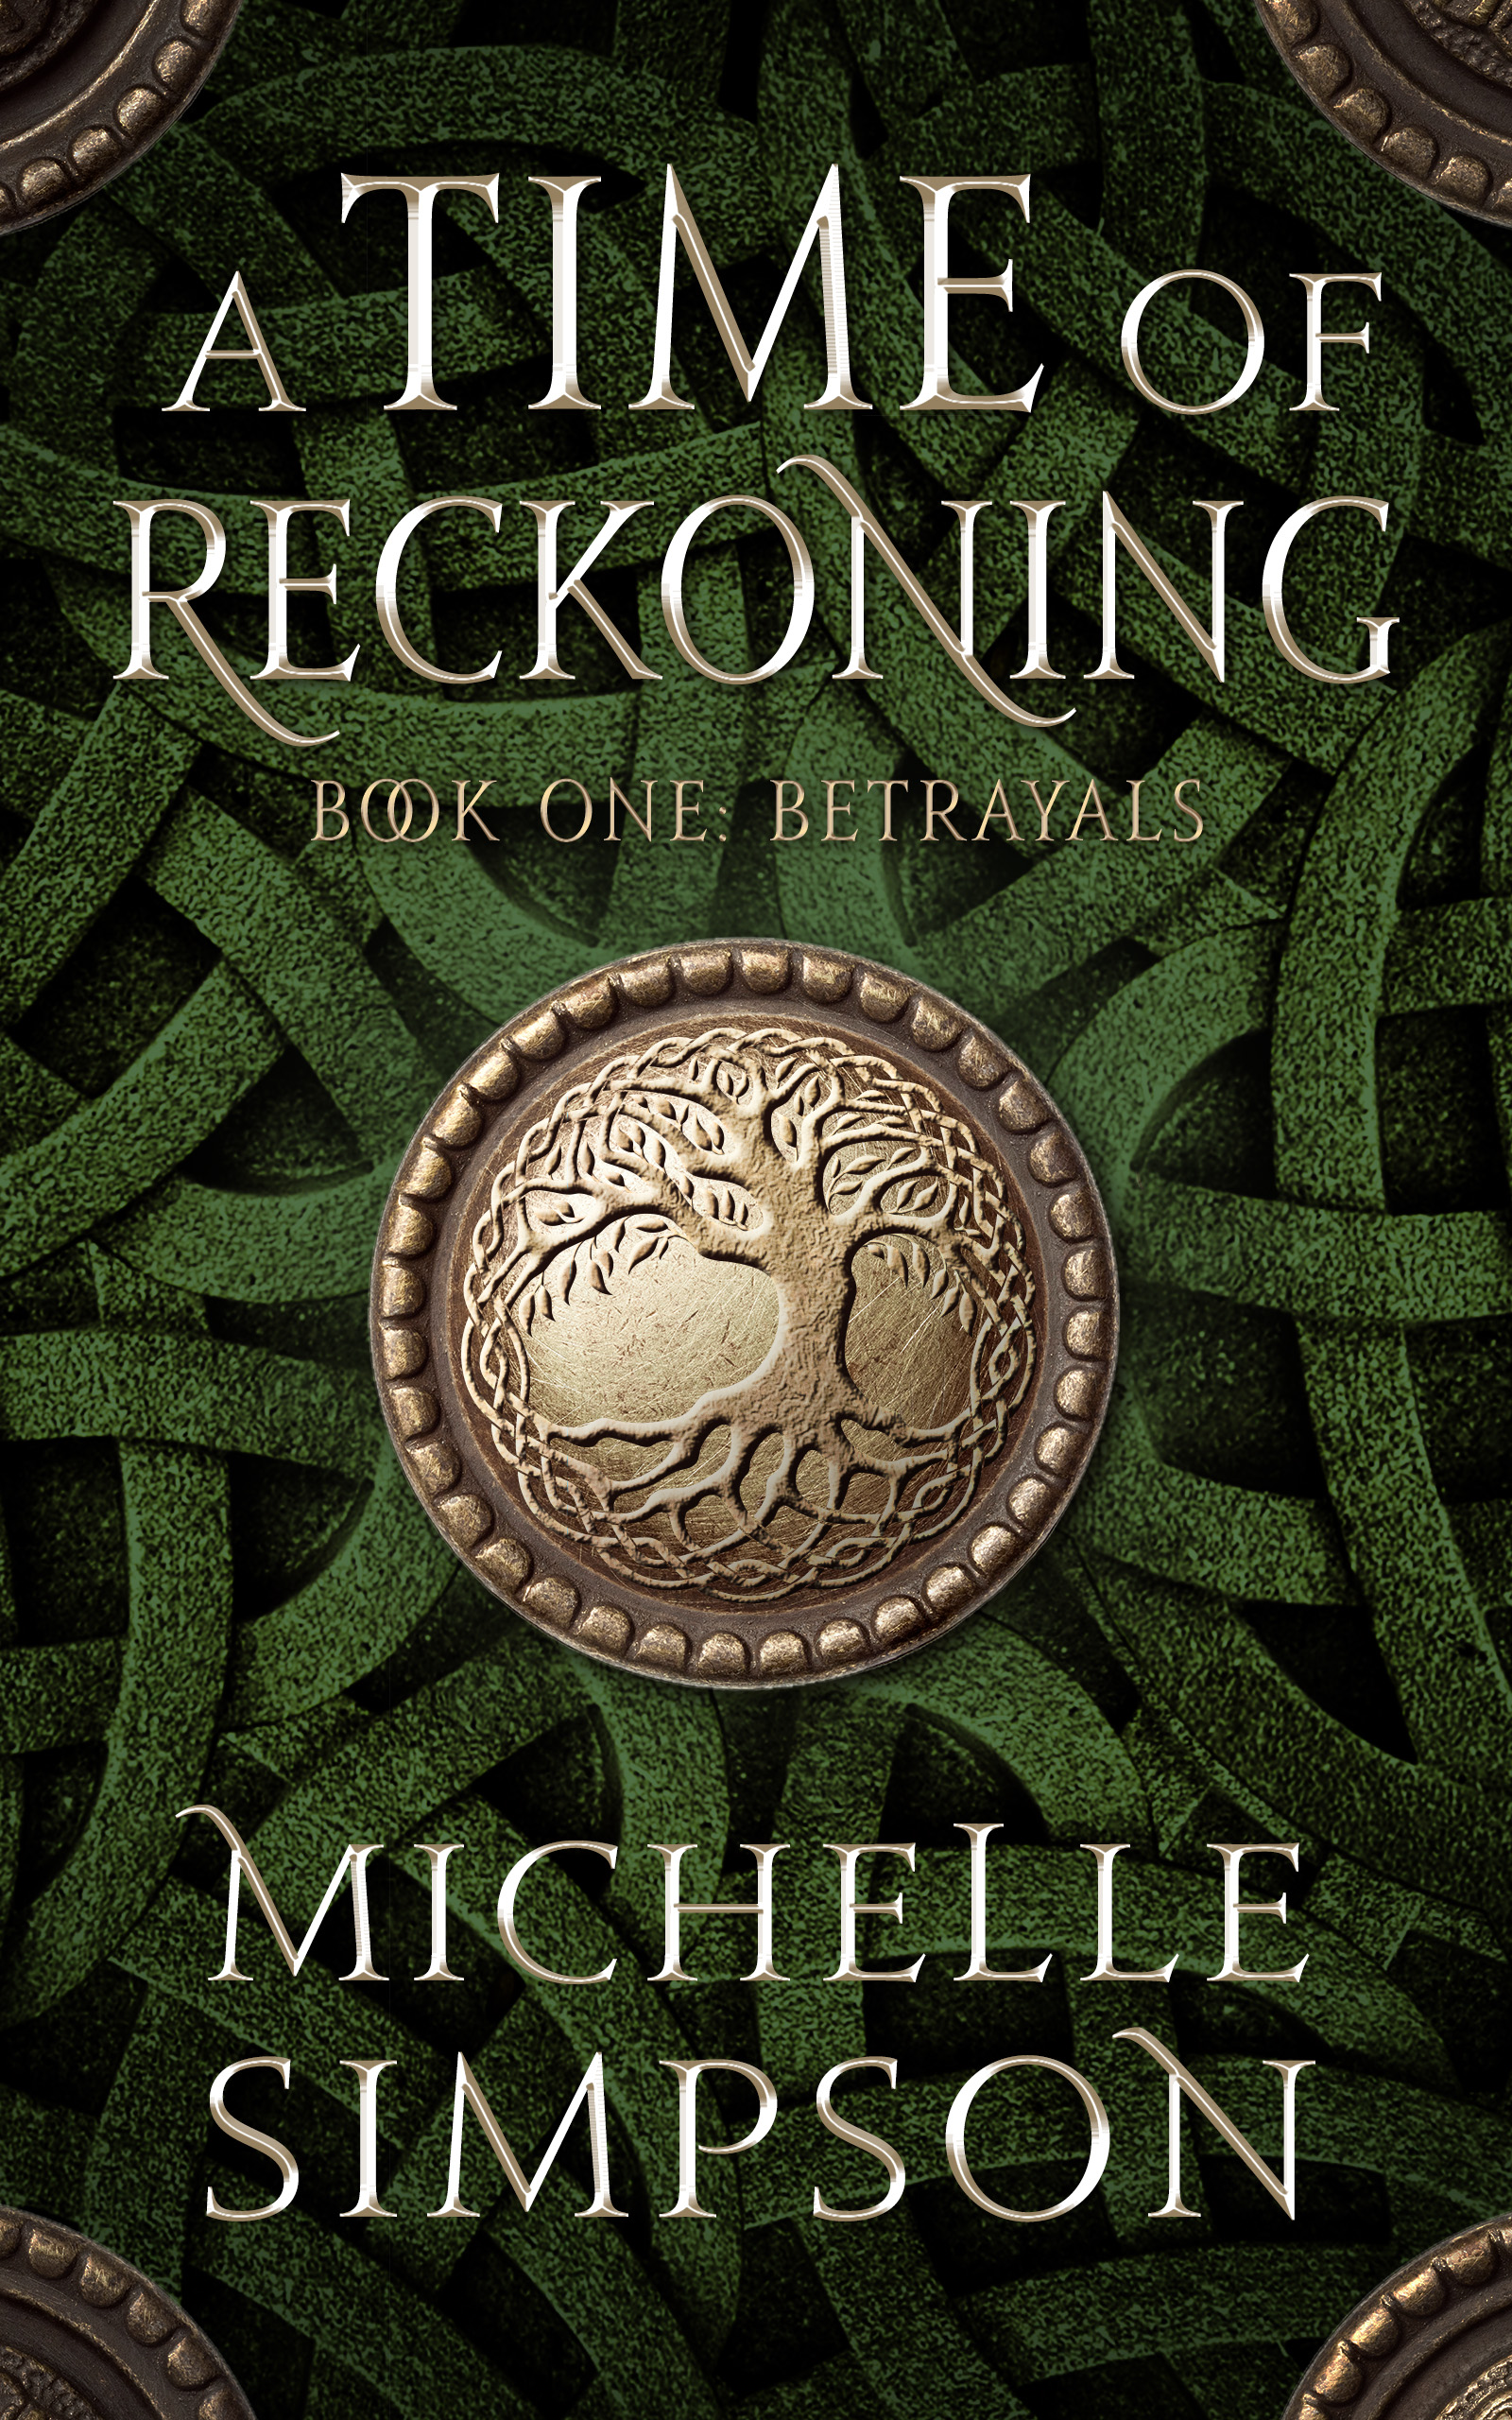 A Time of Reckoning: Betrayals, Book One by Michelle Simpson